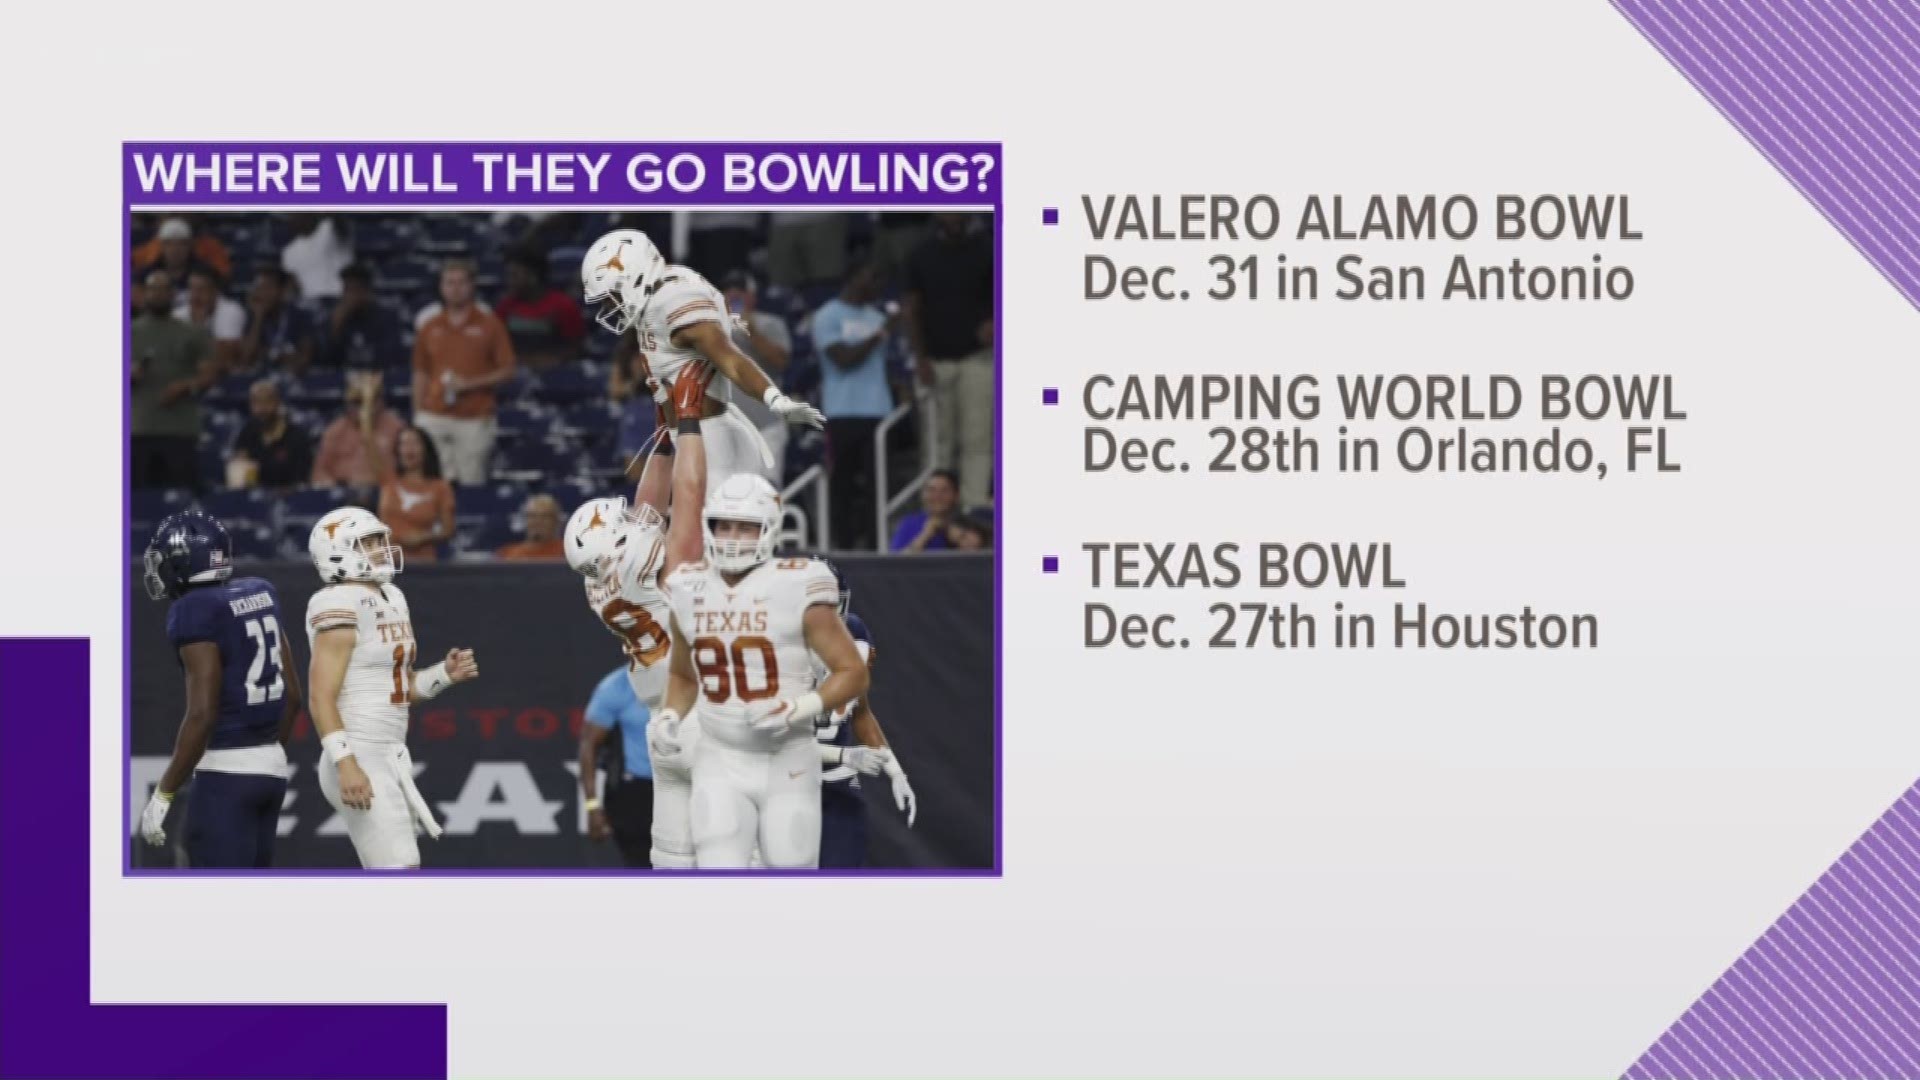 With a 7-5 record, there are a few bowl game possibilities for the Longhorns. Here are some of those bowl game projections laid out for you.